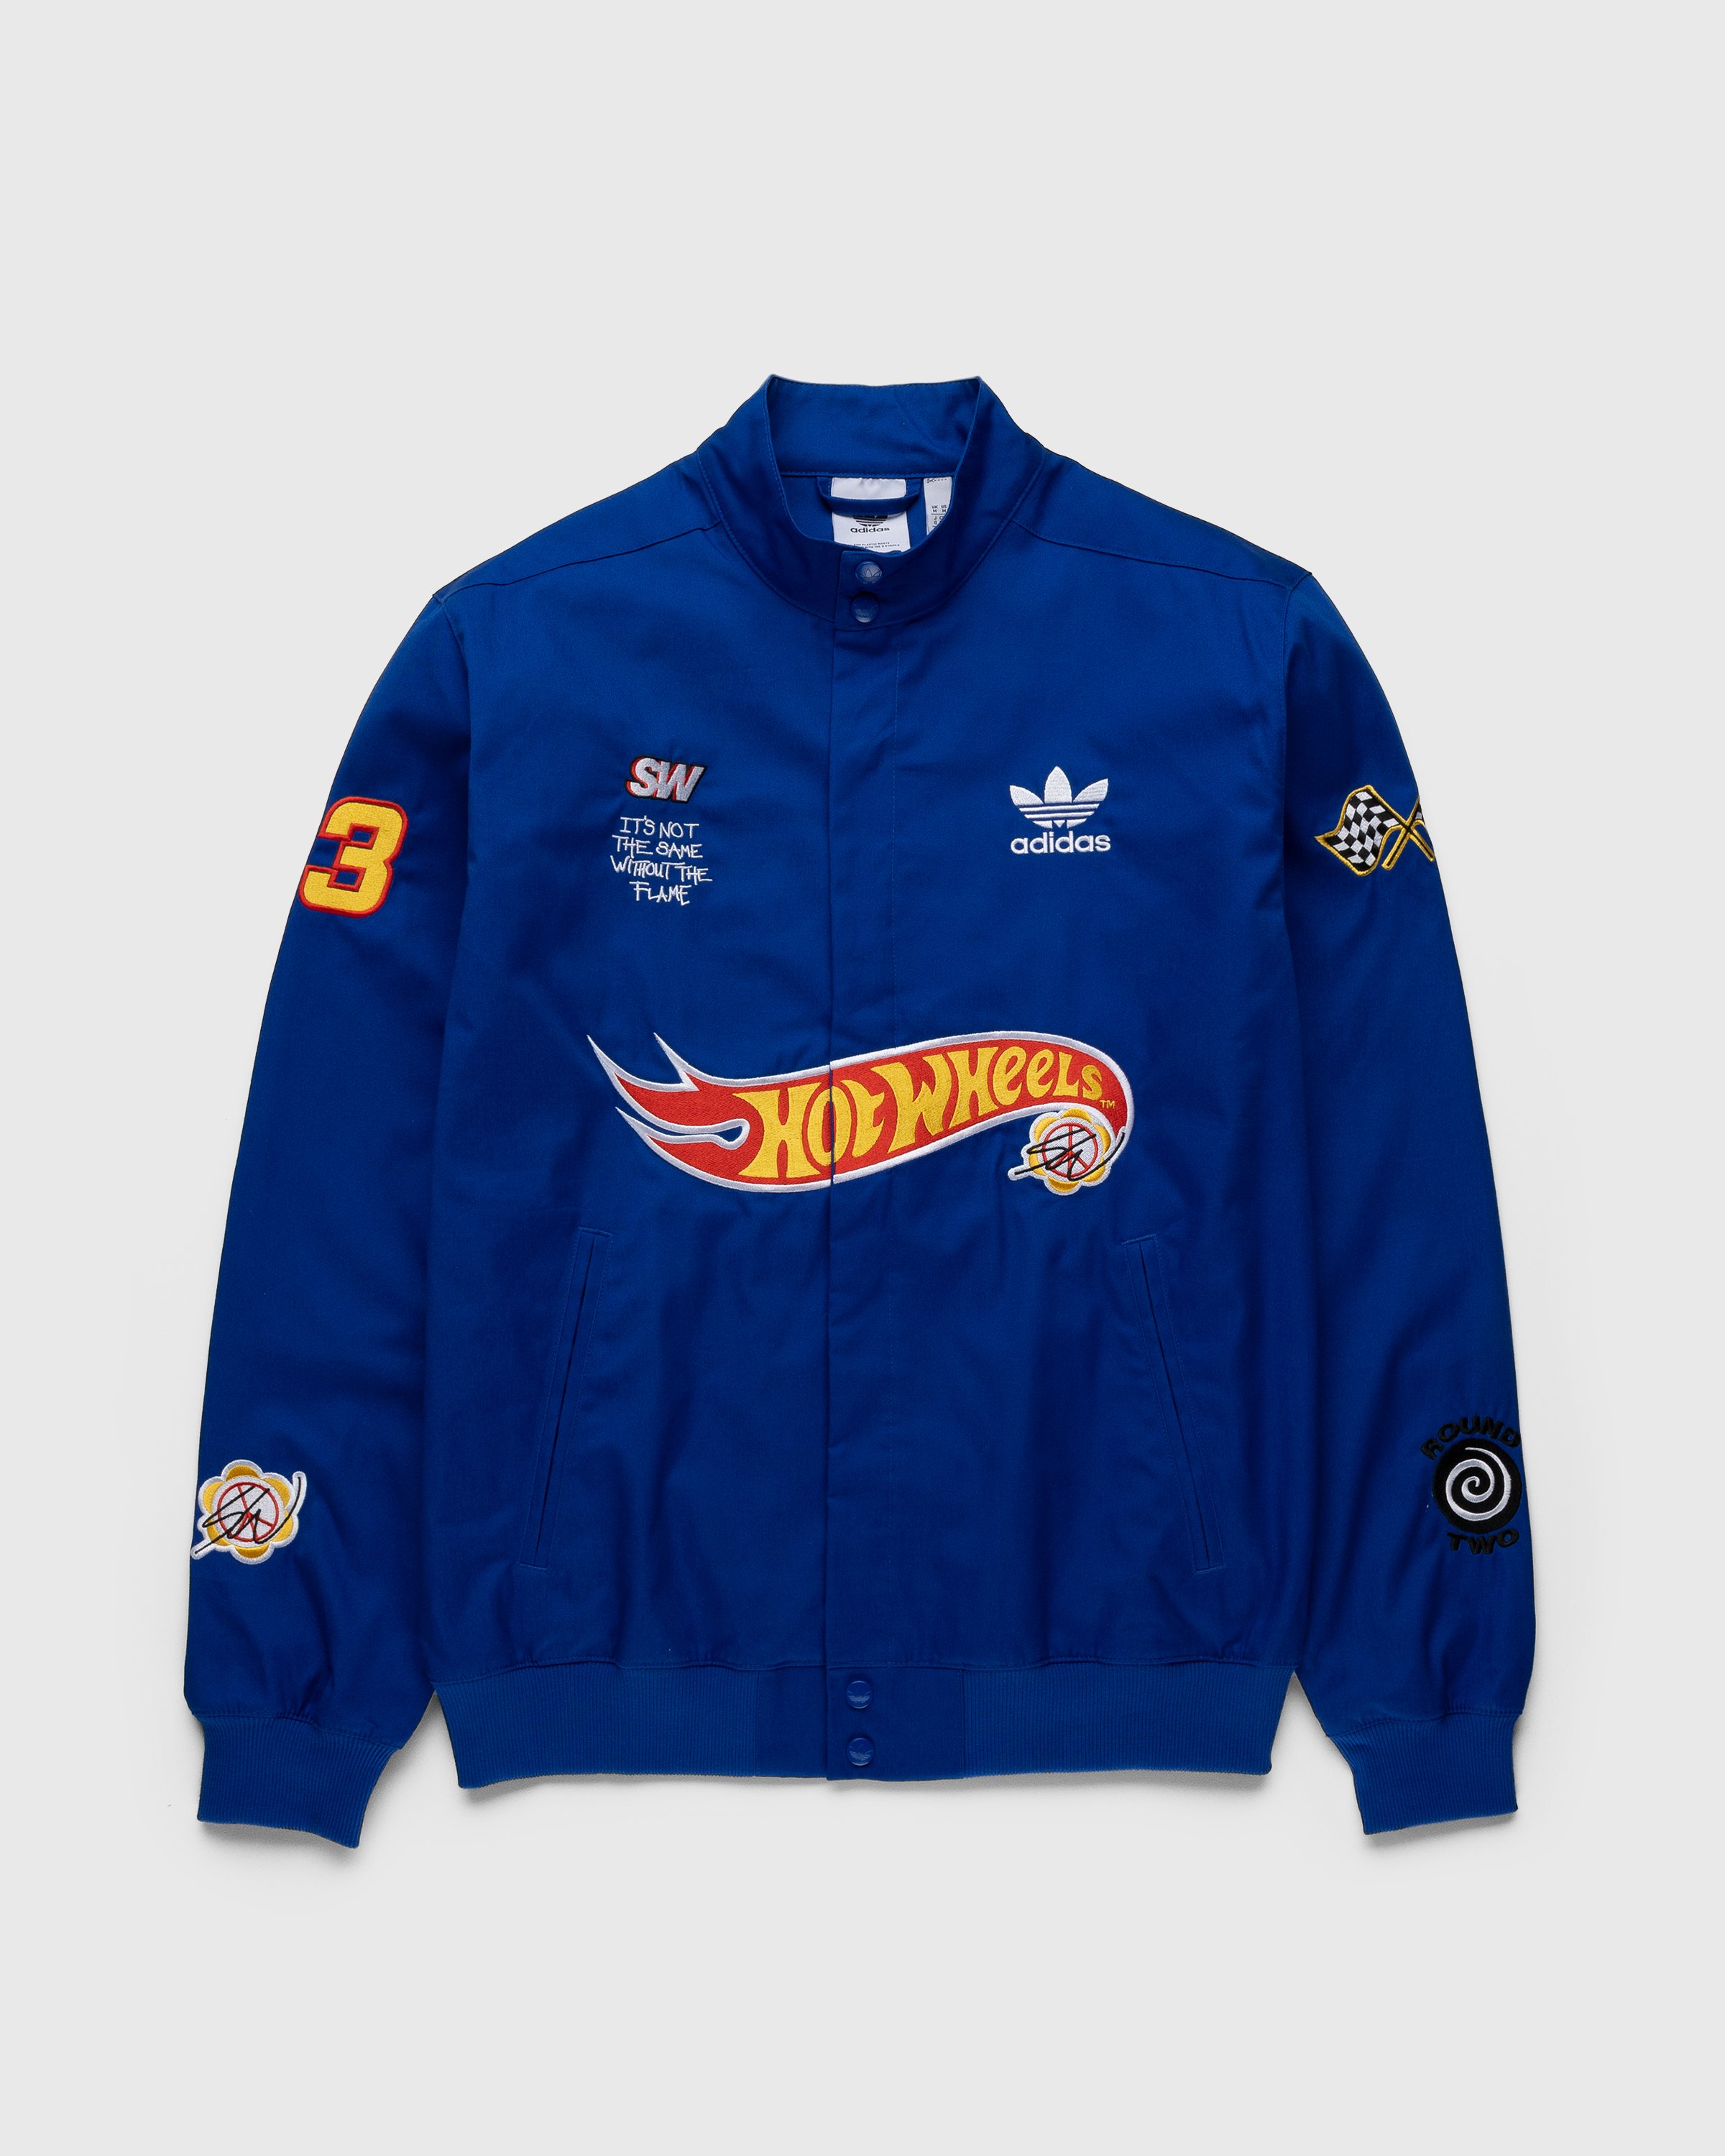 Adidas - Sean Wotherspoon x Hot Wheels Race Jacket Blue - Clothing - Blue - Image 1